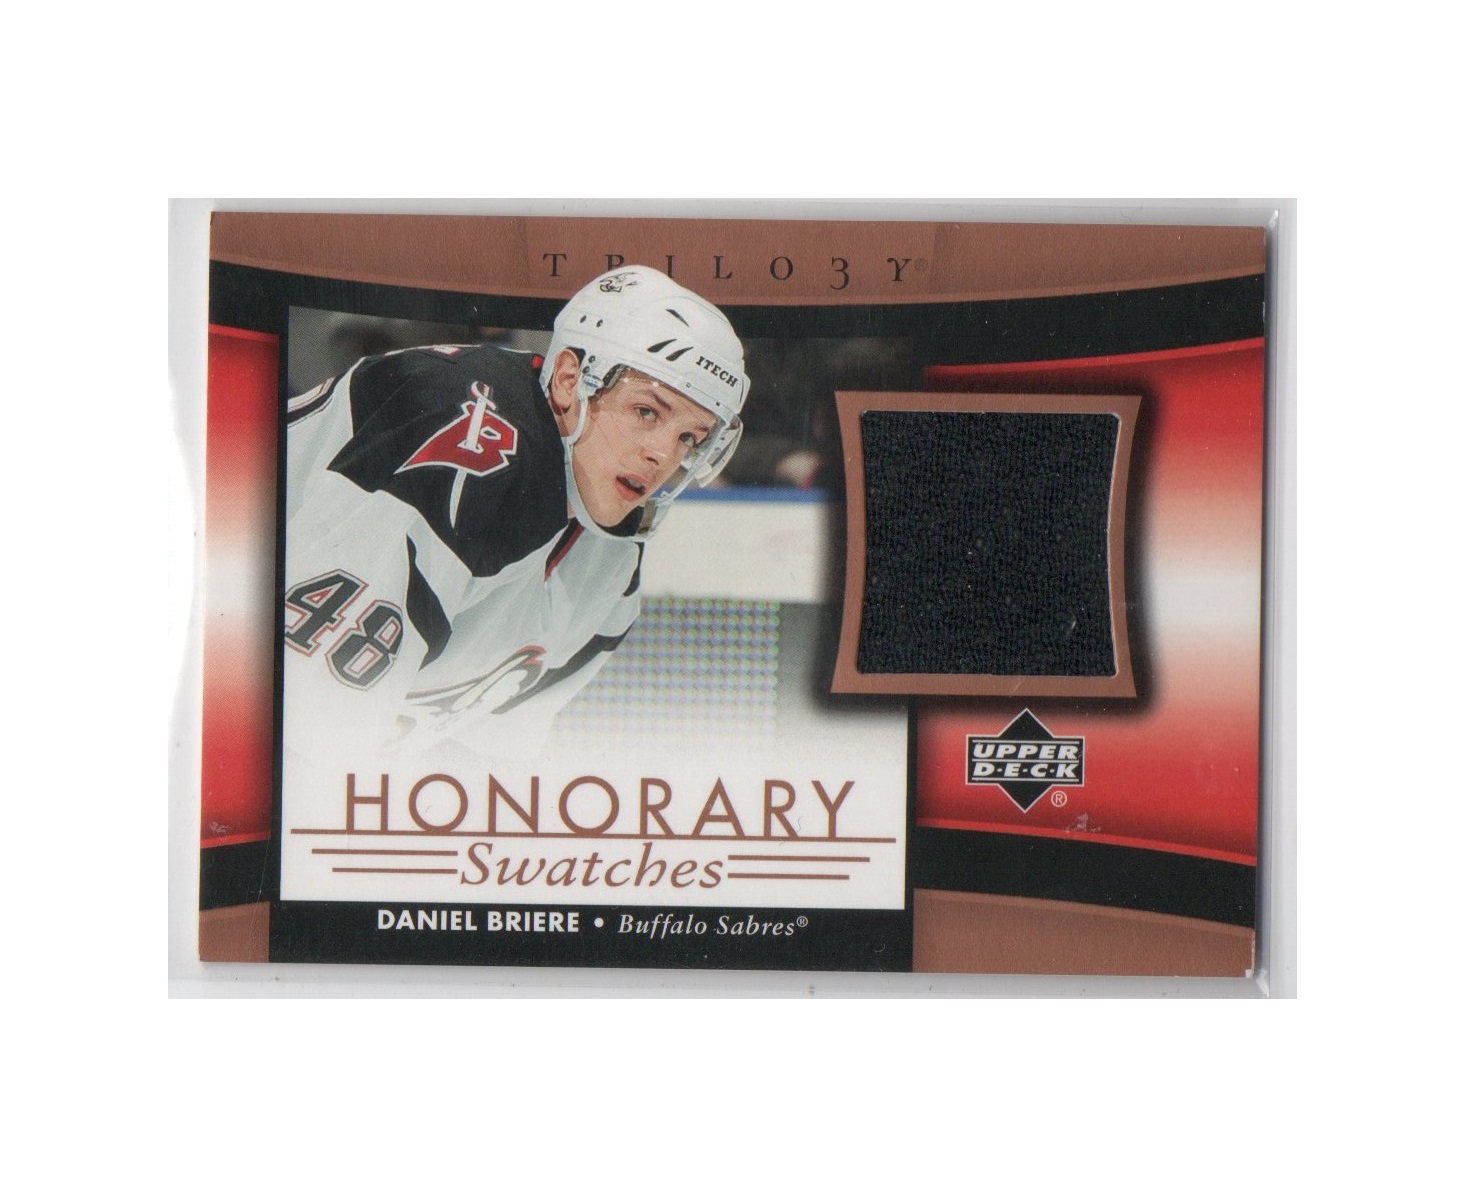 2005-06 Upper Deck Trilogy Honorary Swatches #HSDB Daniel Briere (50-X102-SABRES)